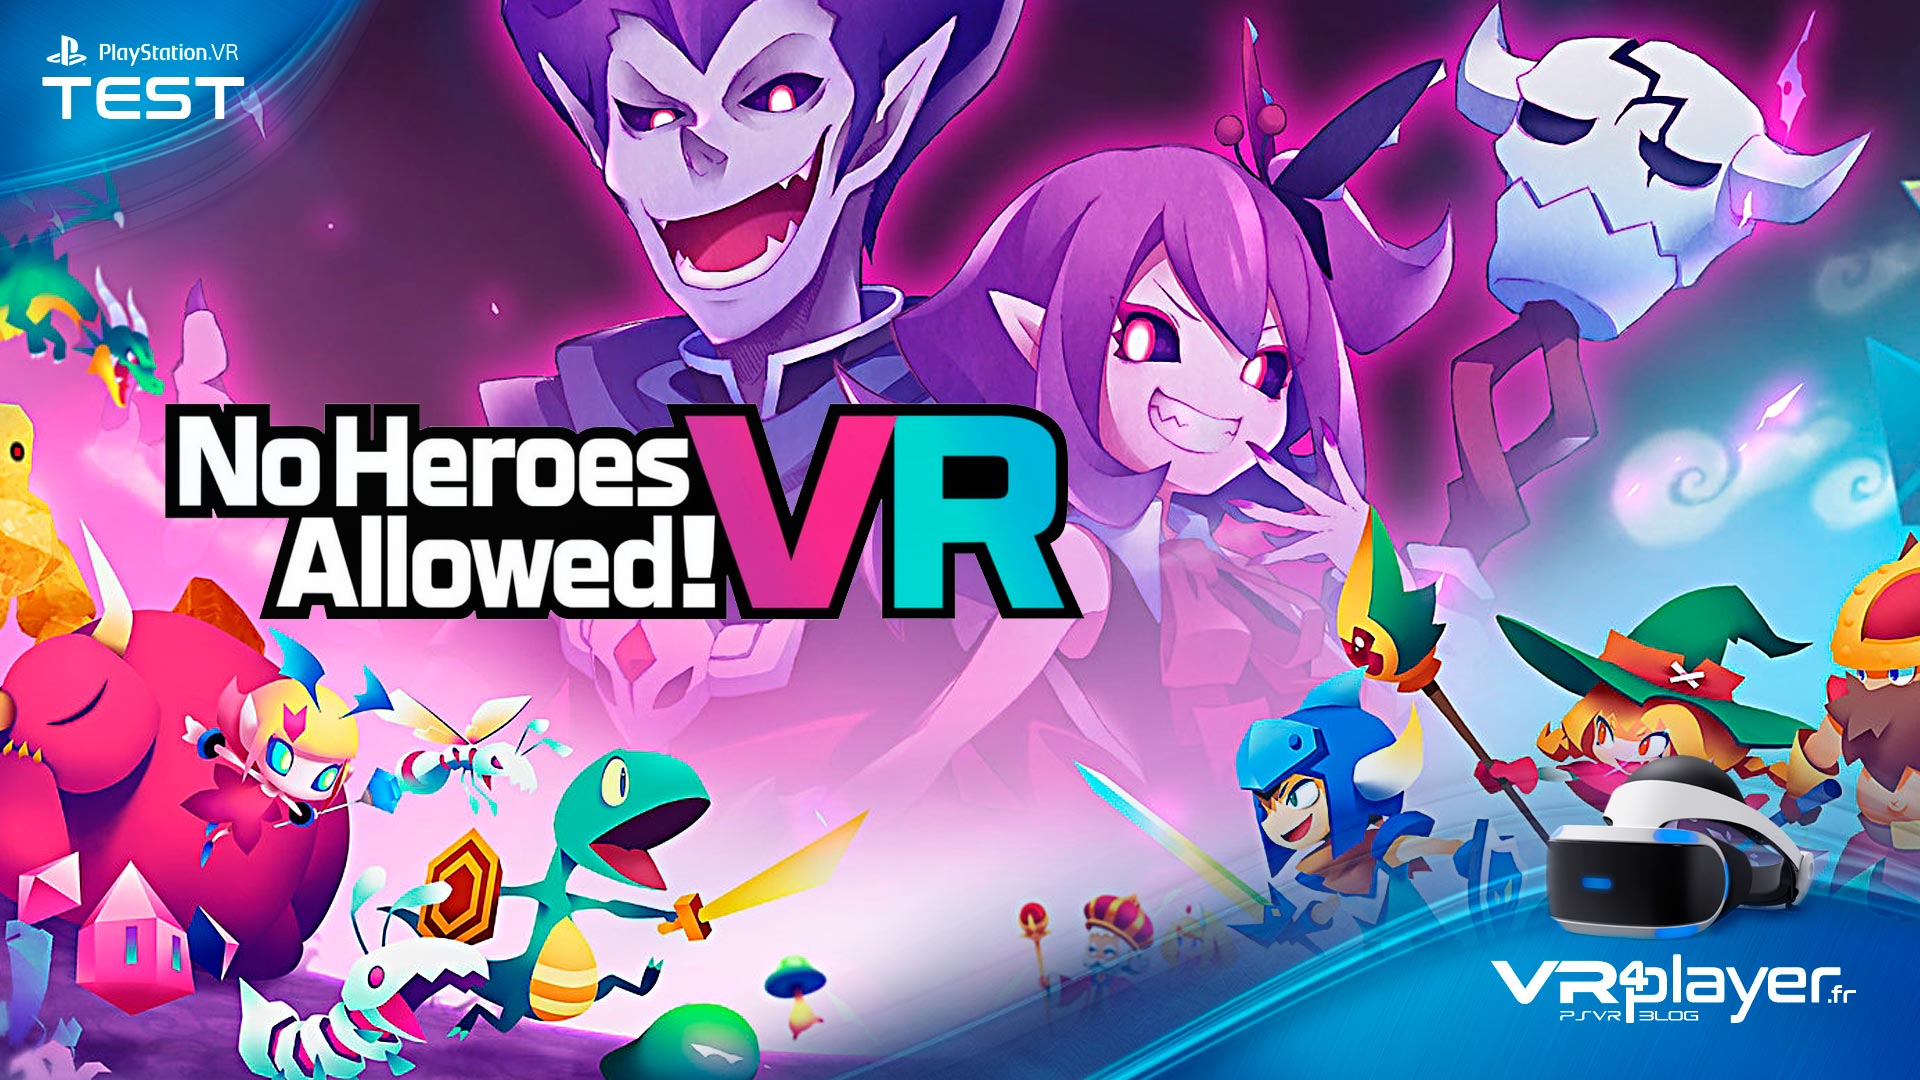 No Heroes Allowed! Test Review Vr4Player.fr